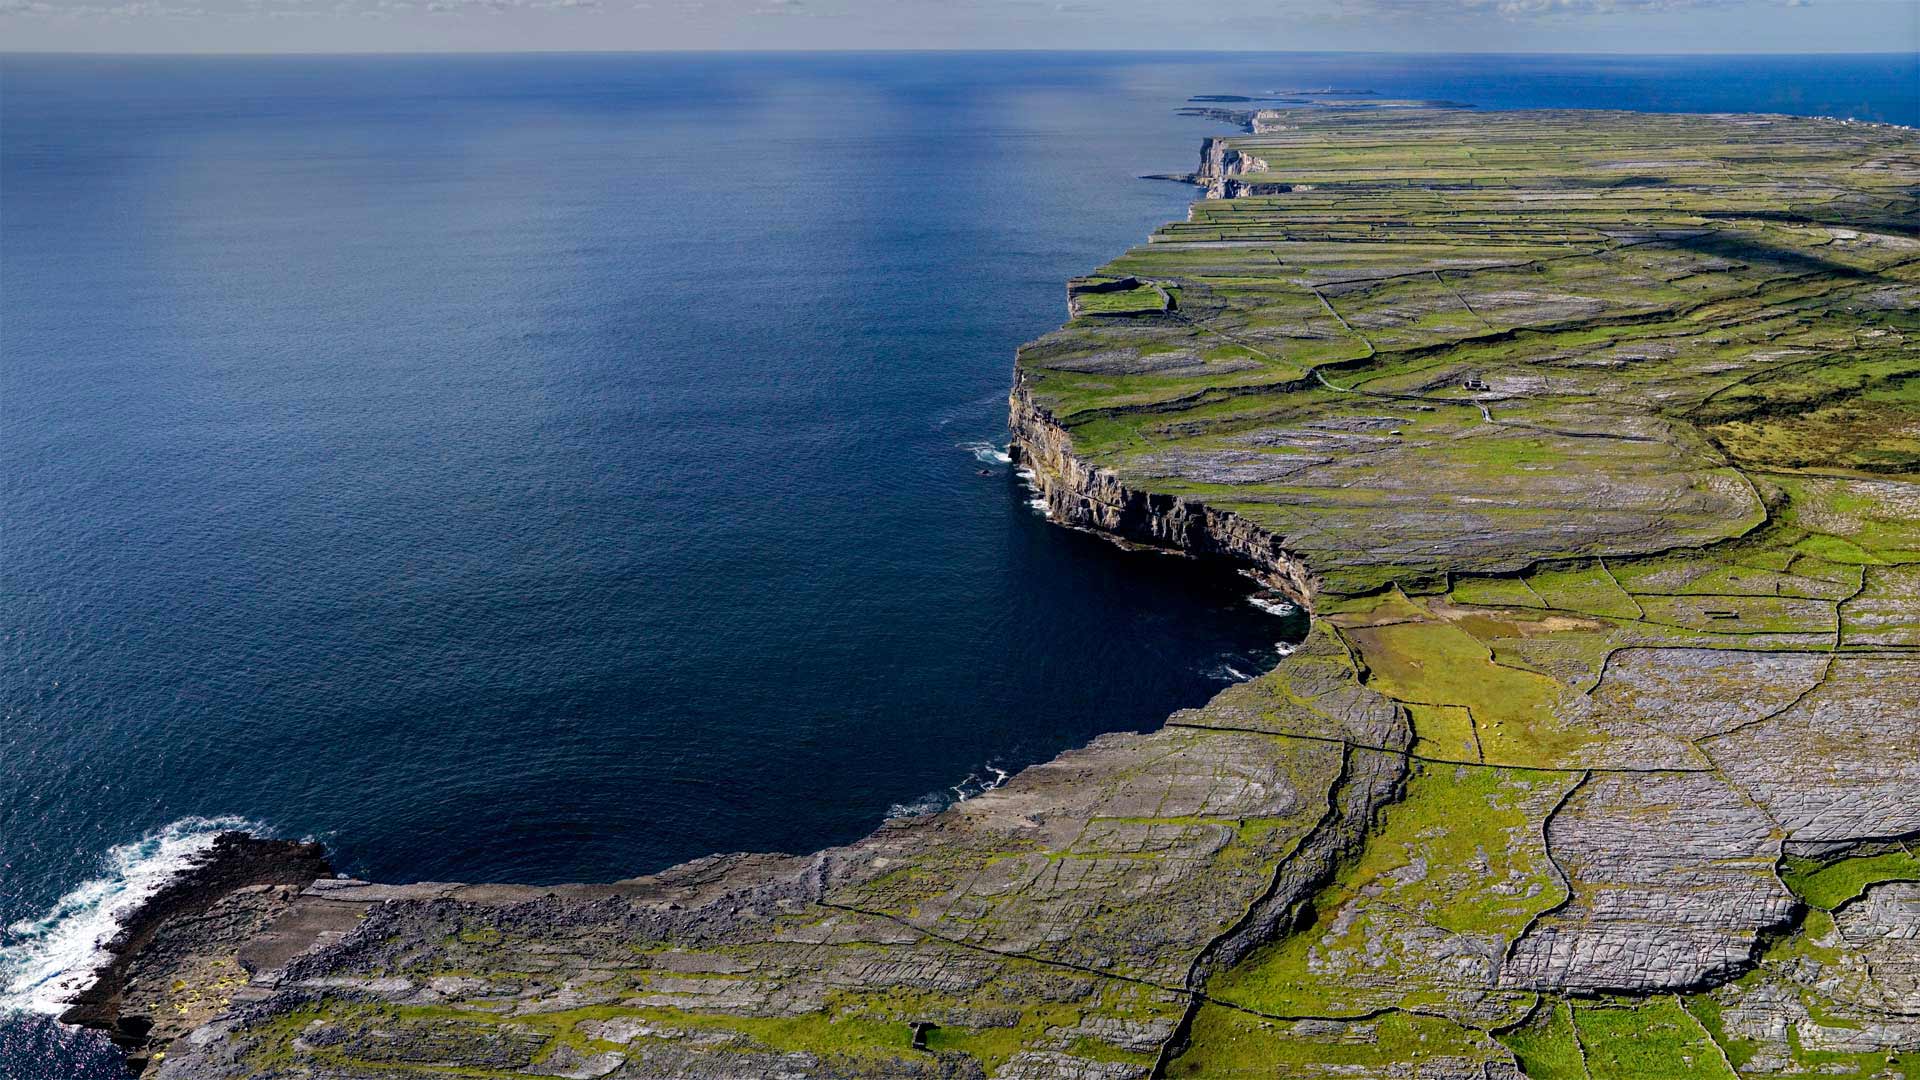 Inisheer, the smallest of the three Aran Islands, in Galway Bay, Ireland - Chris Hill